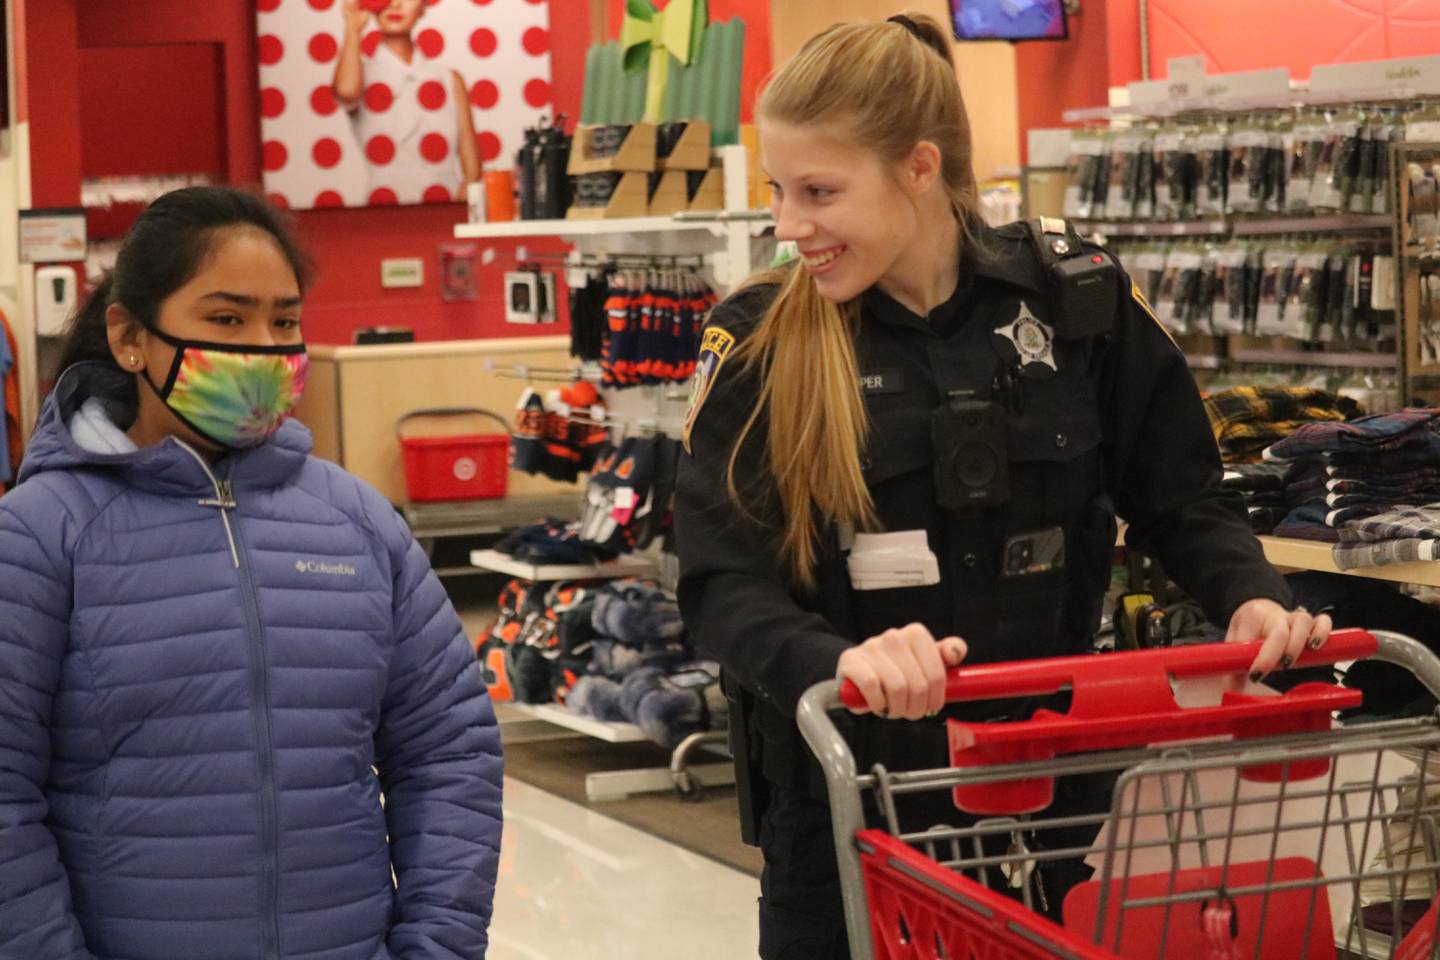 DeKalb resident Maci Serrano, 10, (left) shops with Officer Cooper as part of the "Heroes and Helpers" program put on by DeKalb police Sunday, Dec. 4, 2022.